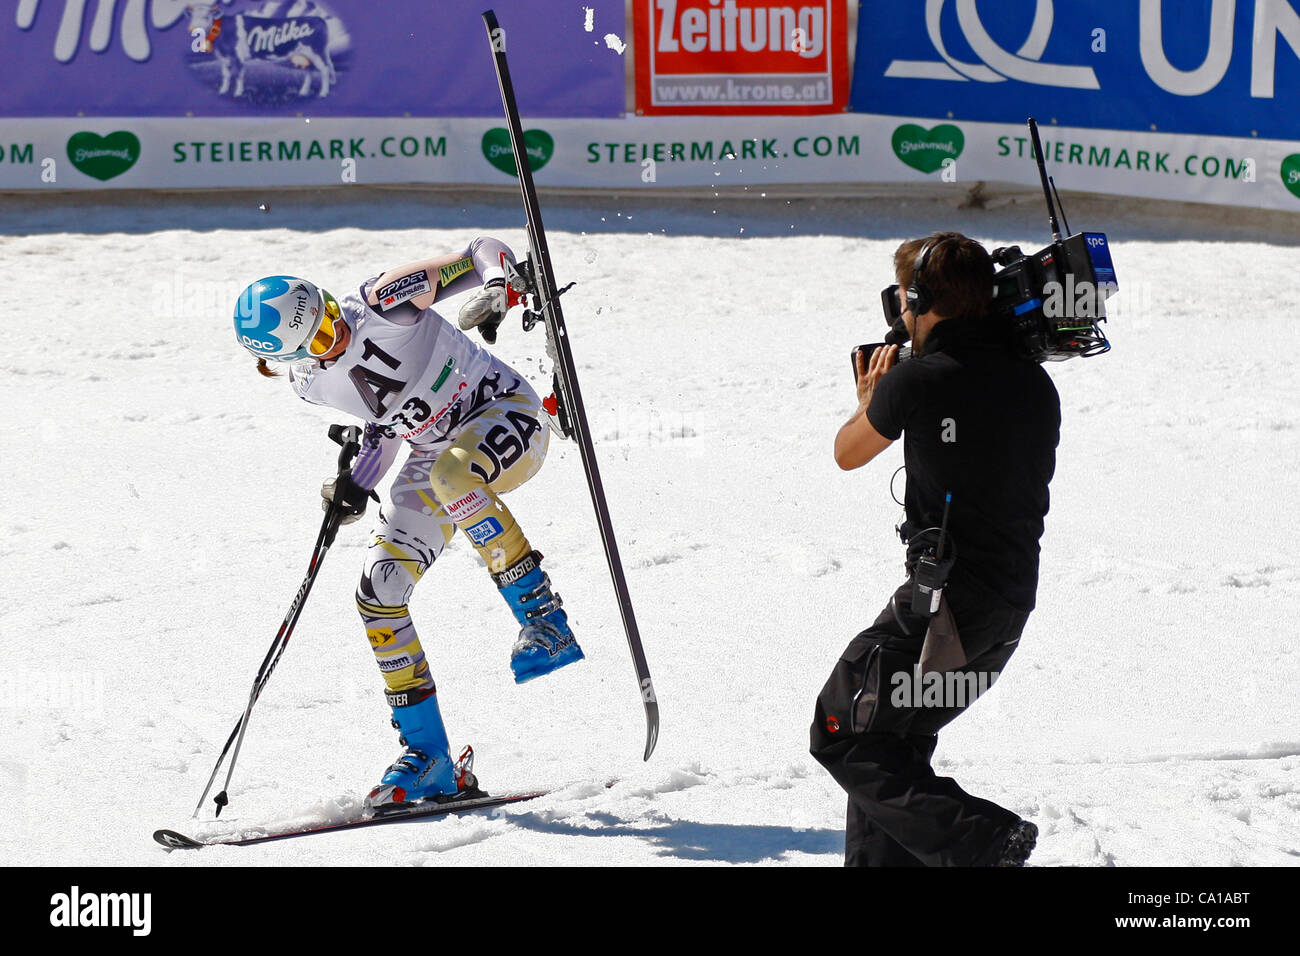 18 March 2012 Schladming, Austria. Julia Mancuso attempts the Cuche flick in the finish area of the womens giant slalom race at the alpine world cup skiing finals. Mandatory Credit: Mitchell Gunn Stock Photo